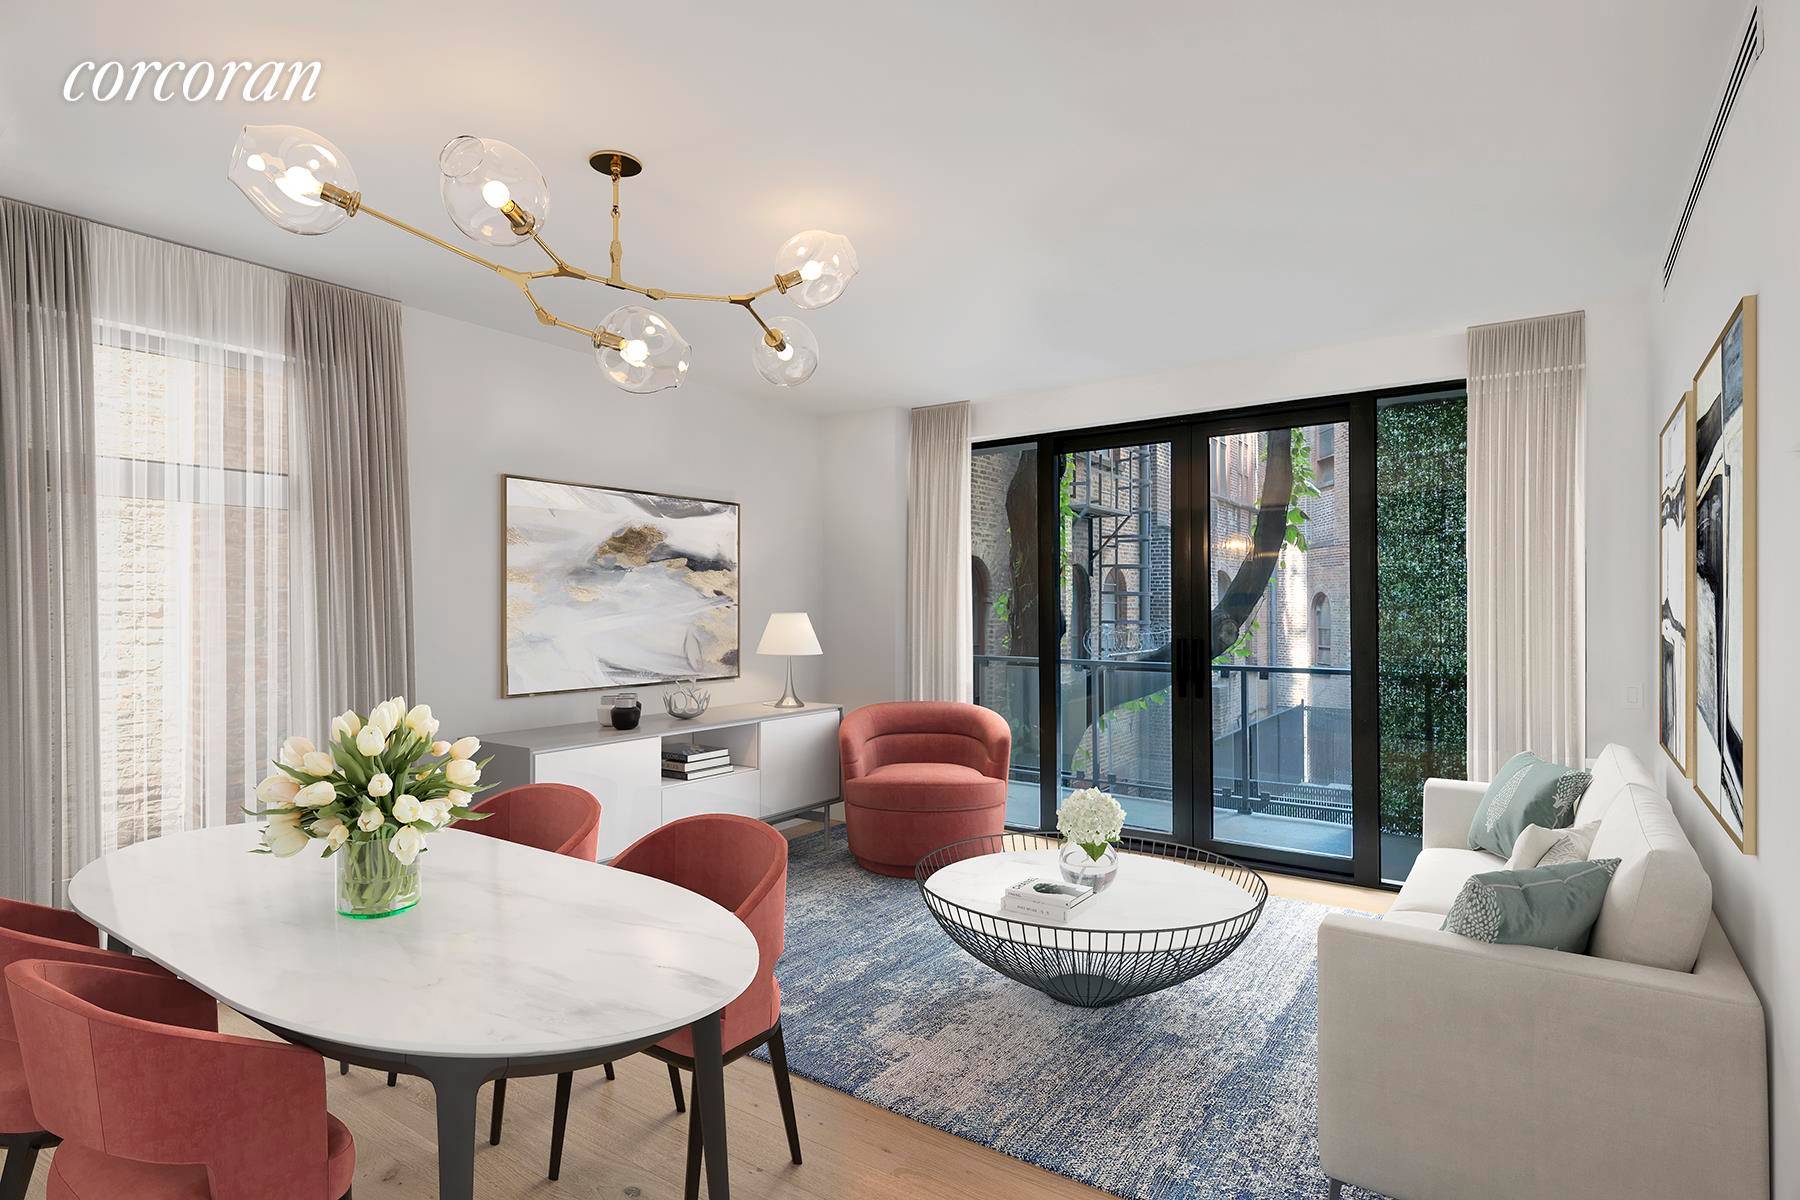 Residence 404 at Hillrose28 is a north facing 729 SF one bedroom and one bath home with a 123 SF terrace that sits quietly above a historic and preserved church ...